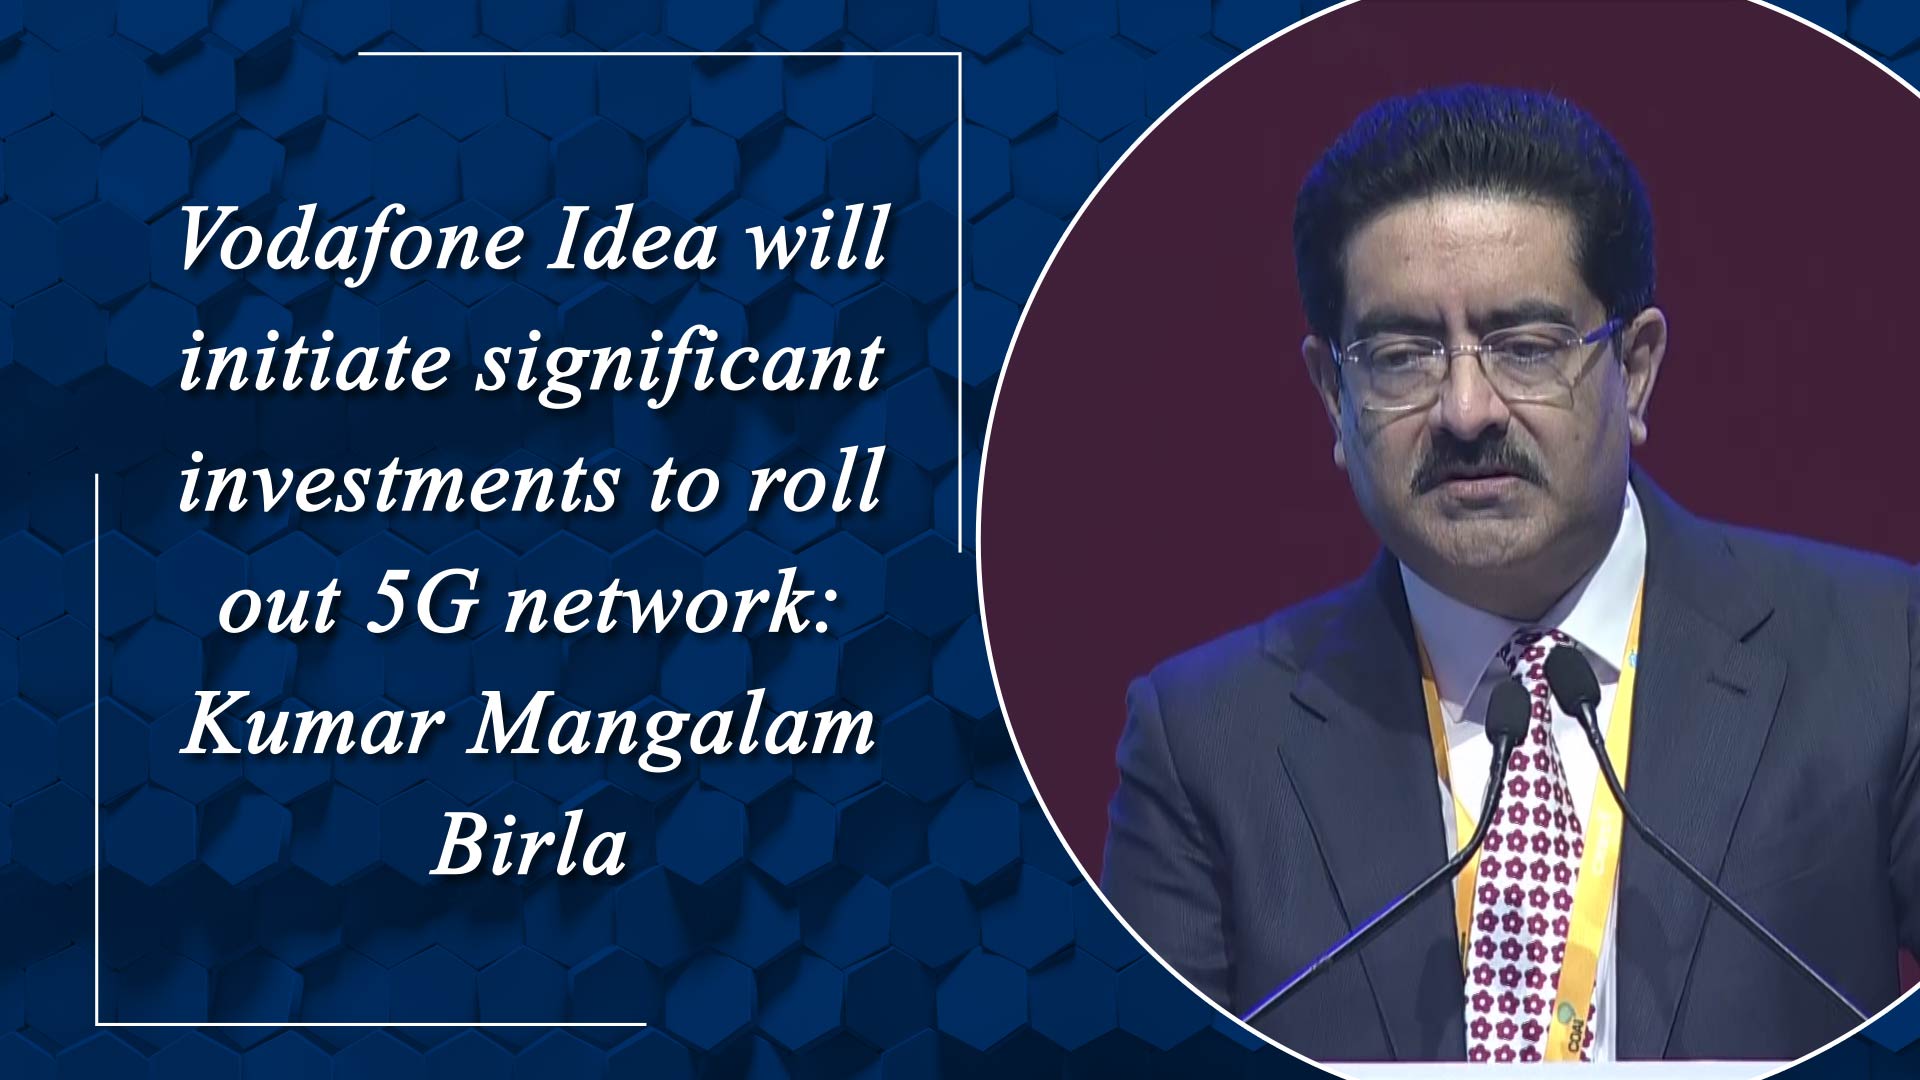 Vodafone Idea will initiate significant investments to roll out 5G network: Kumar Mangalam Birla